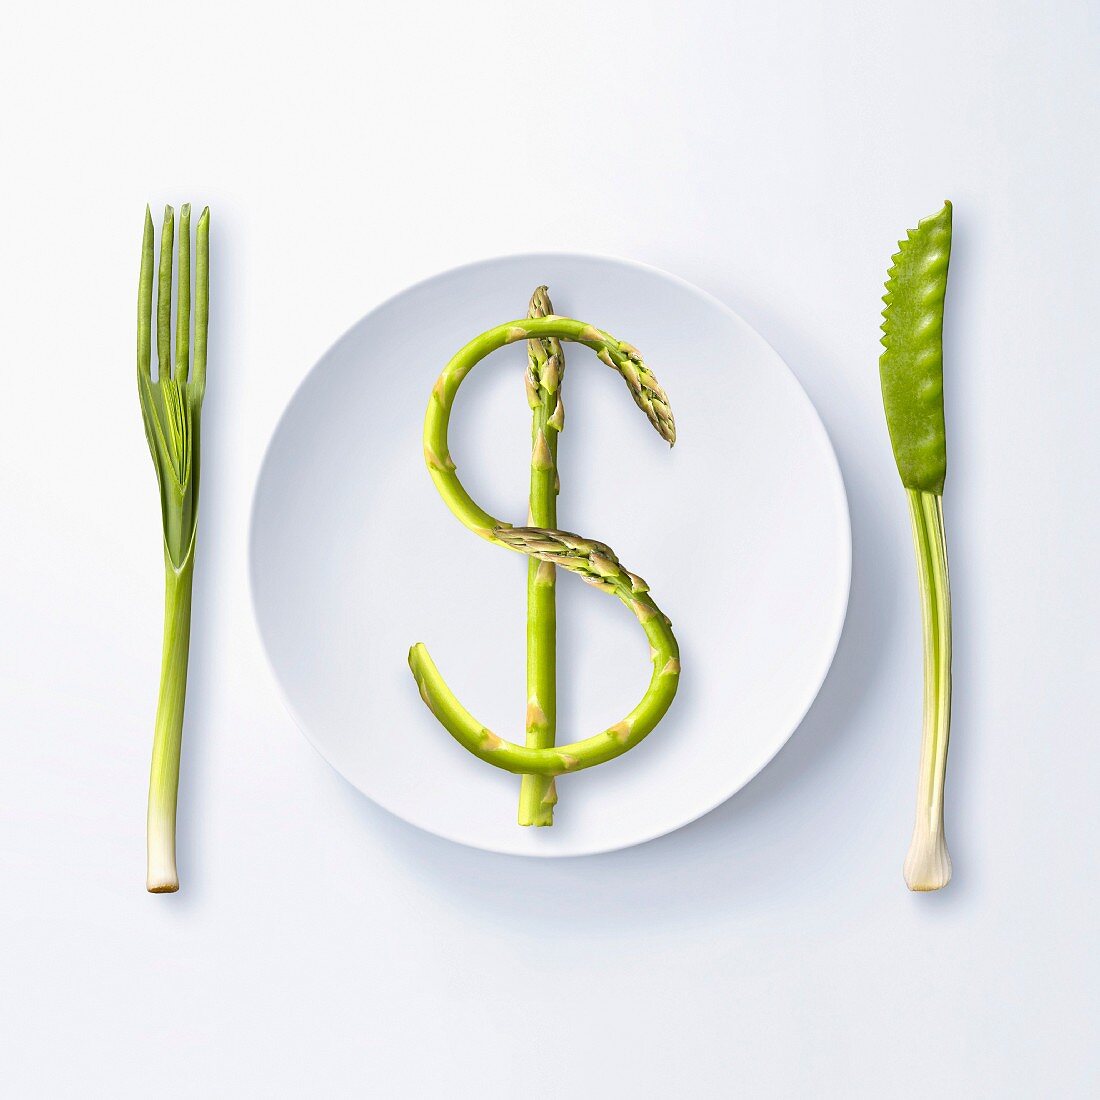 $, written with green asparagus on a plate